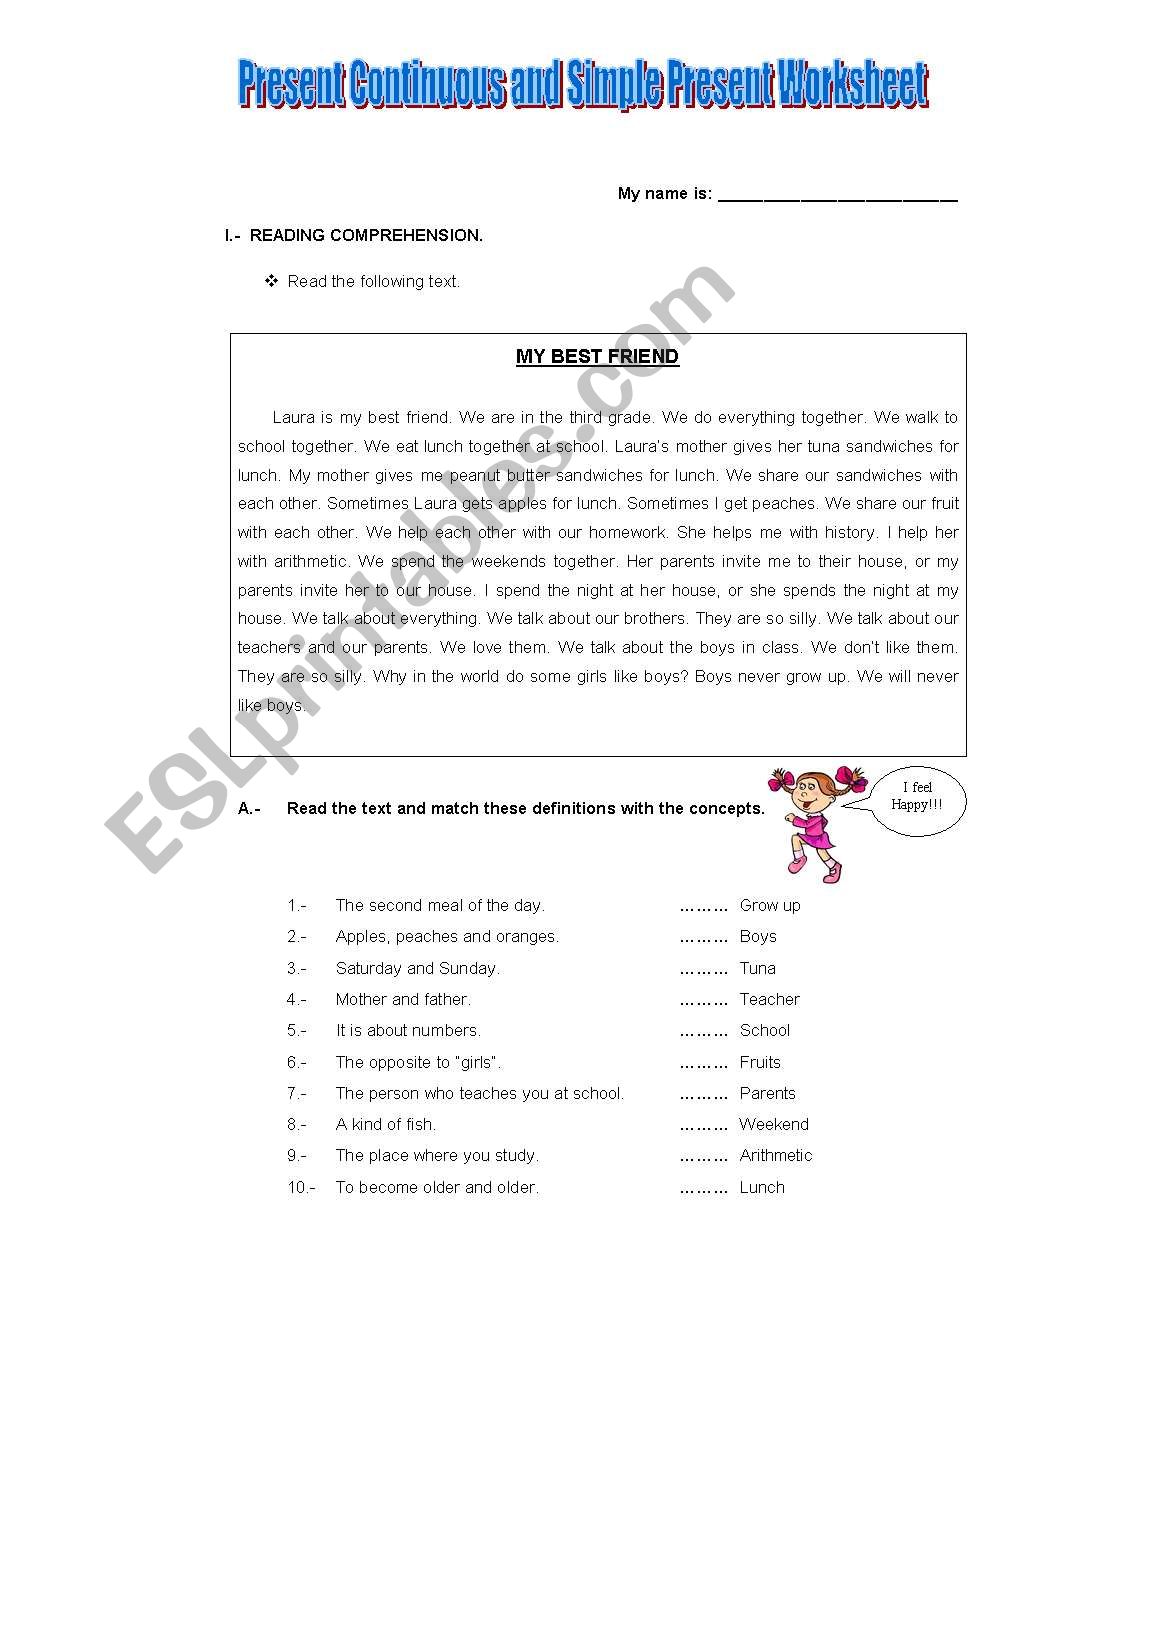 Present Continuous and Simple Present Worksheet